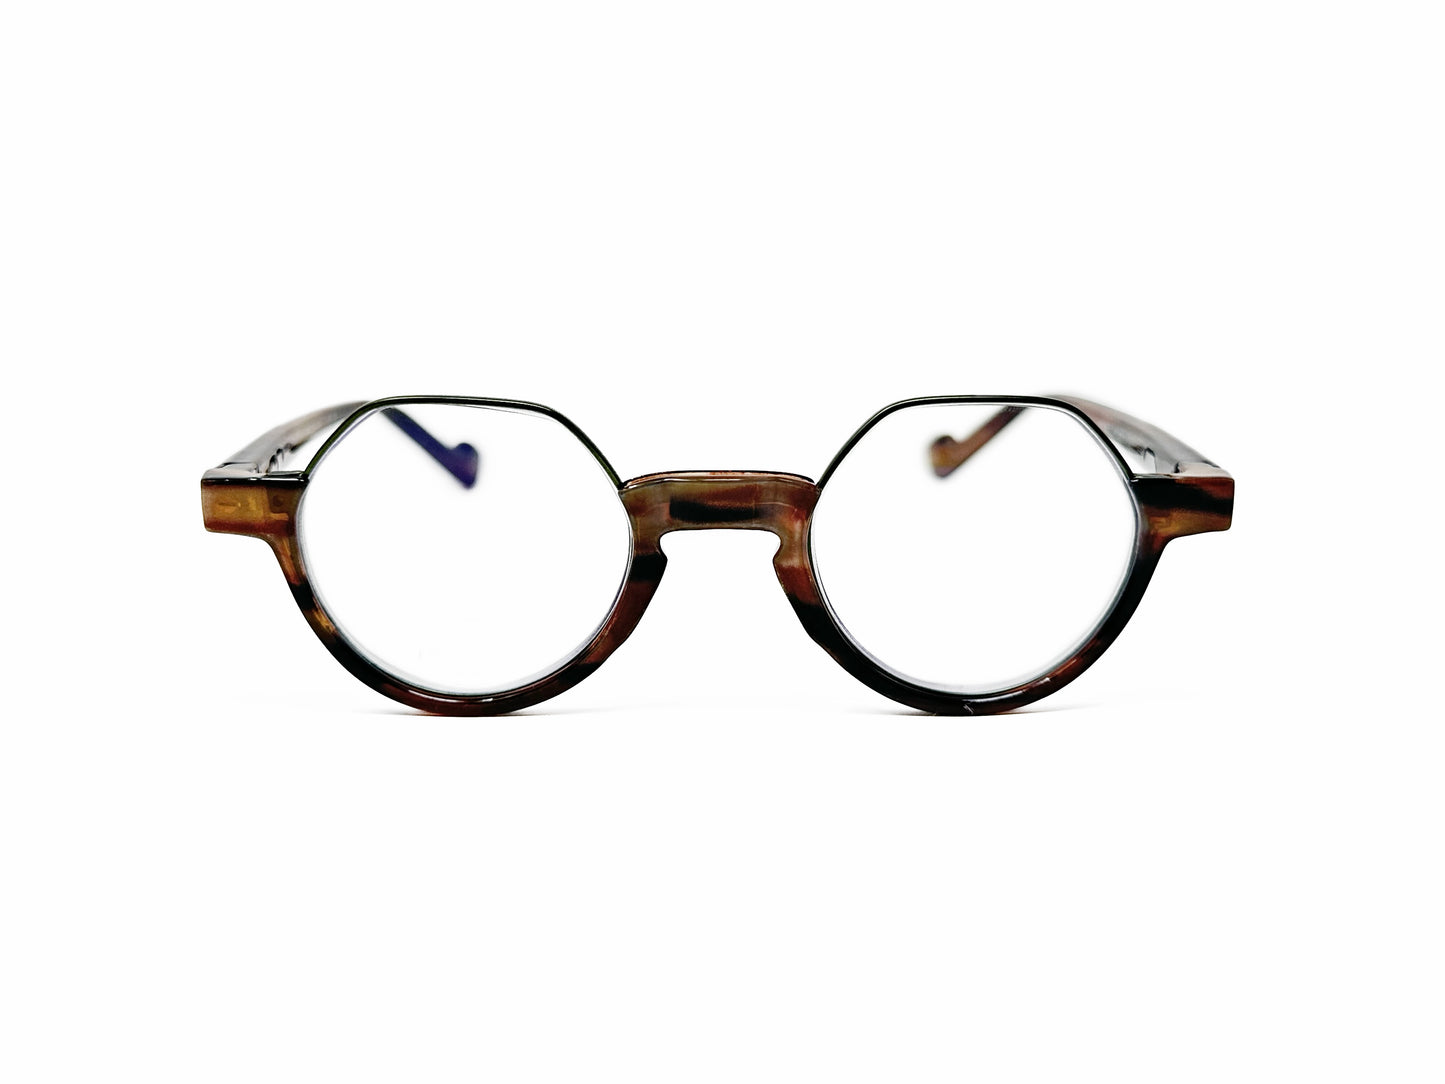 Aptica round acetate reader with flattop. Model: Rituals. Color: Brown buffalo horn with silver trim on top. Front view.